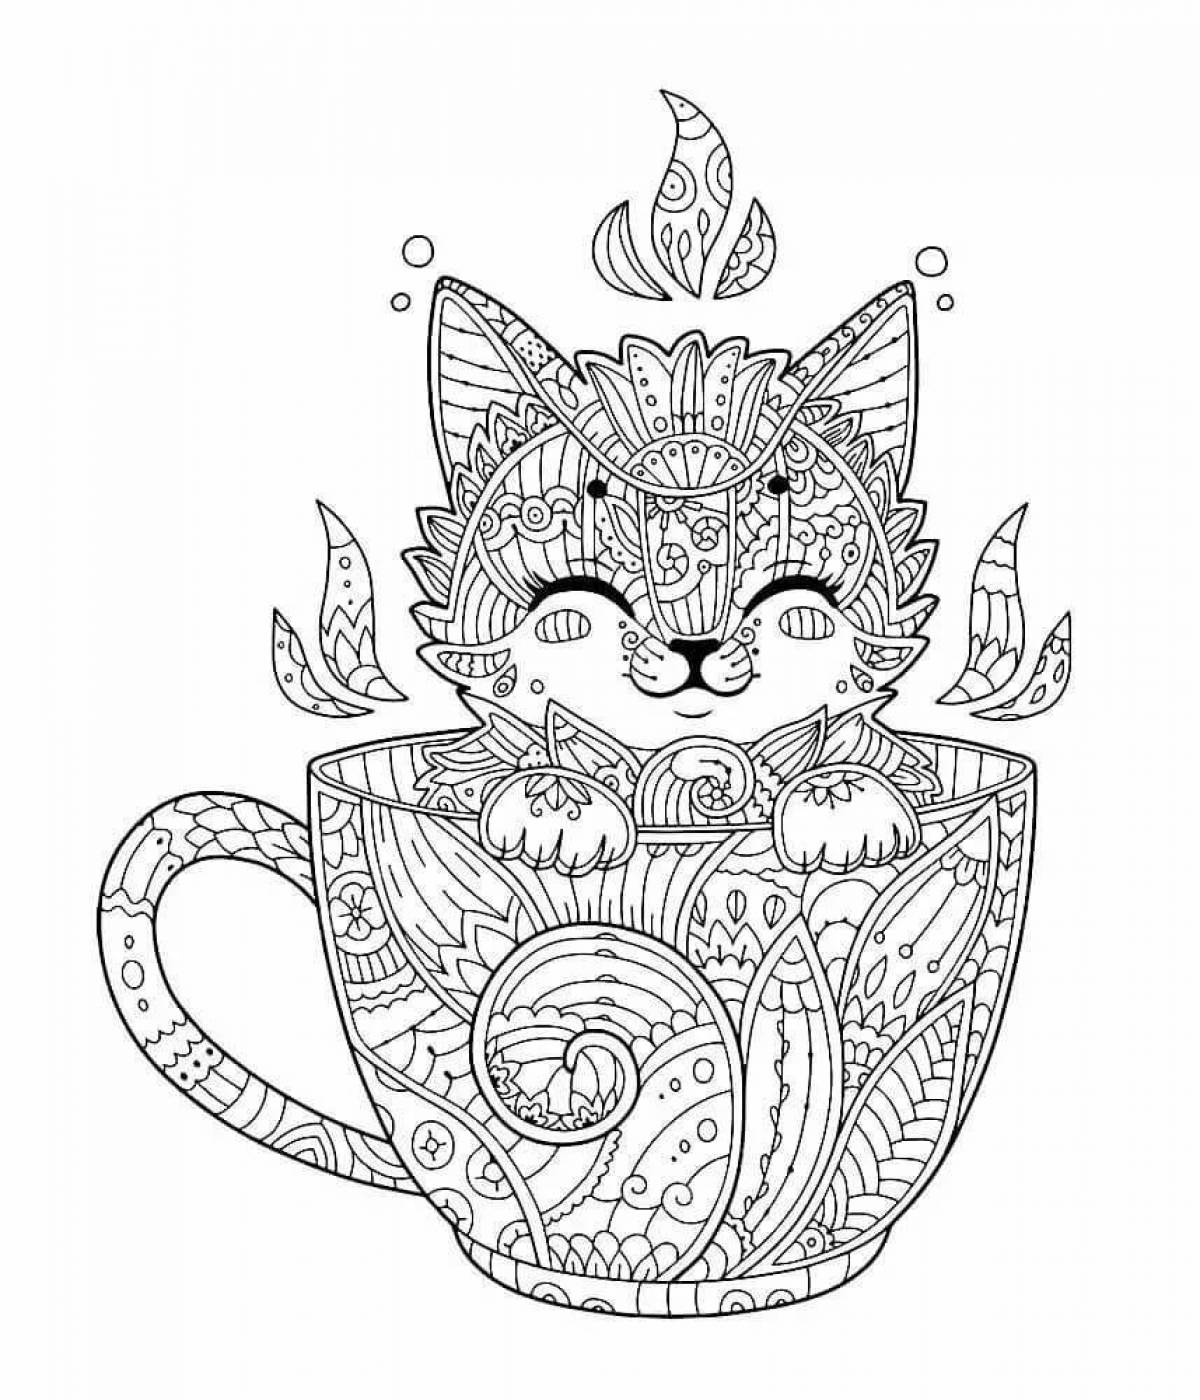 Soothing anti-stress coloring book for adults